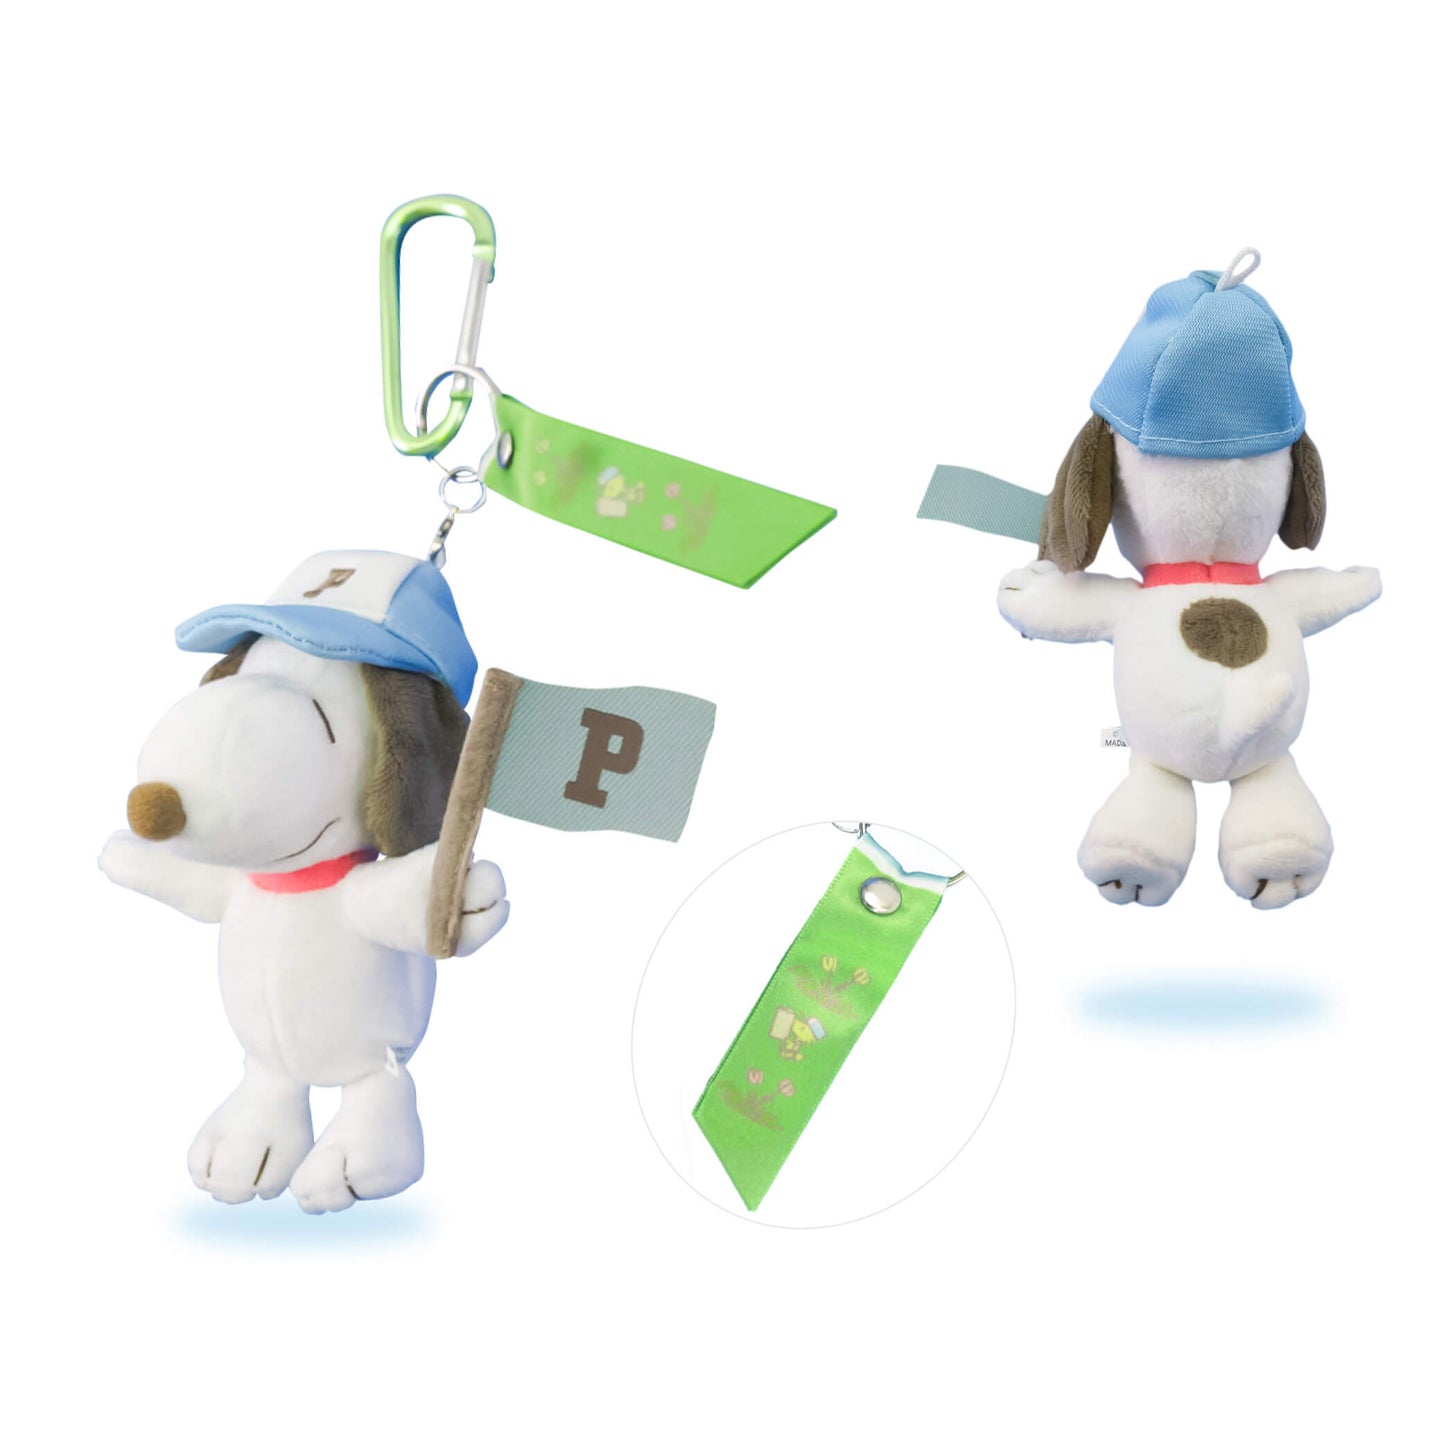 【Pre-order】SNOOPY TOWN Limited "Peaceful days of PEANUTS" - Plush / Plush Chain